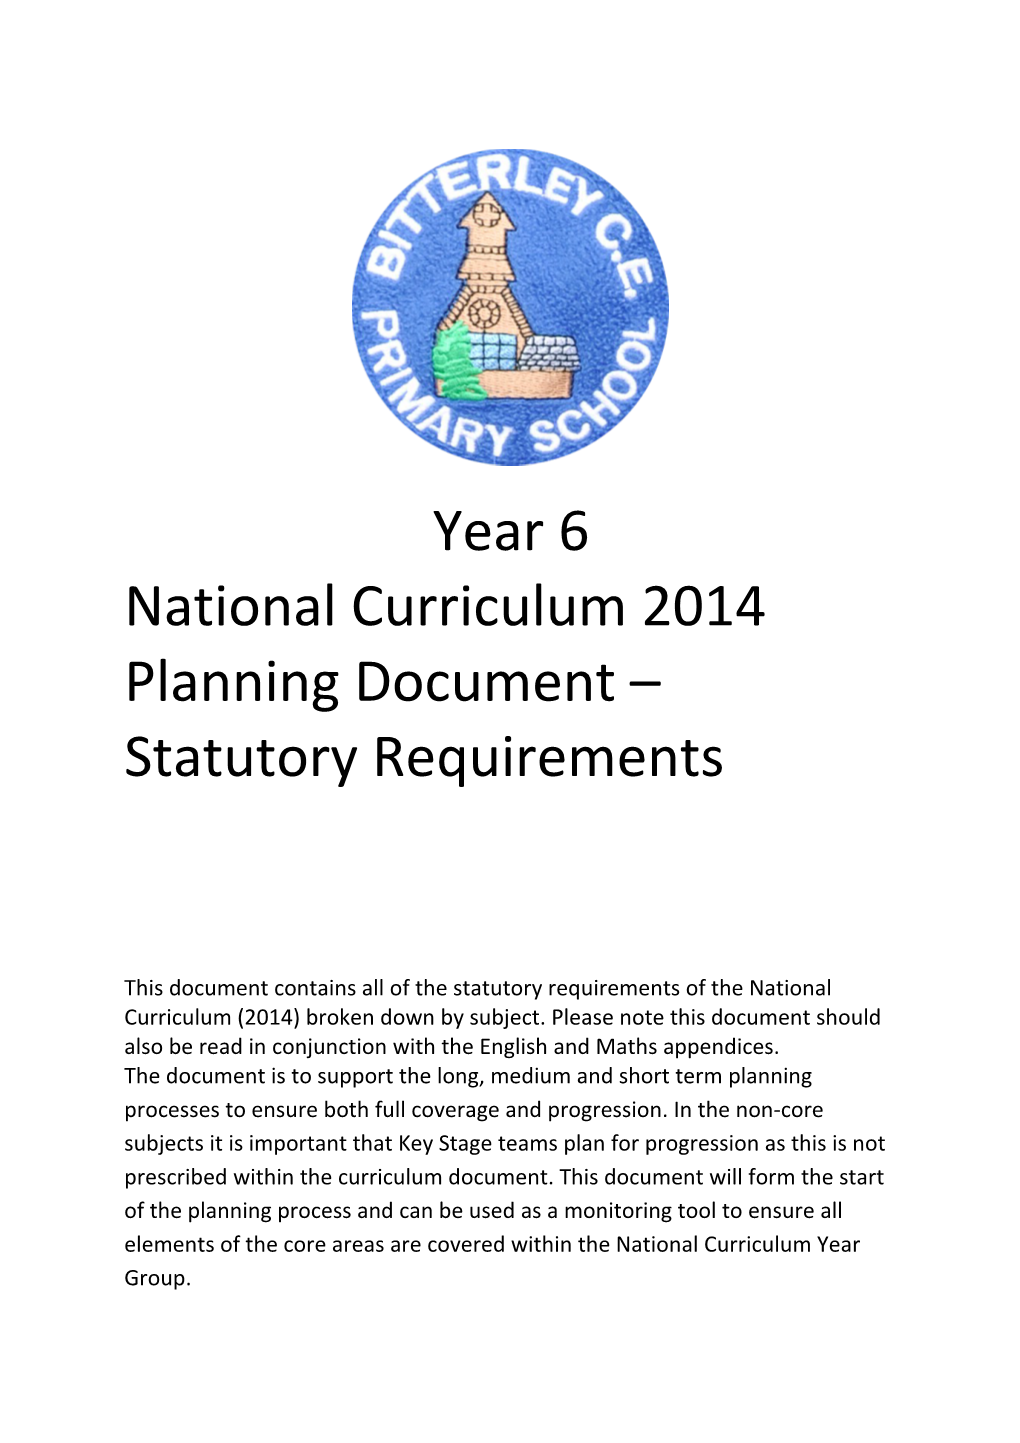 National Curriculum 2014 Planning Document Statutory Requirements